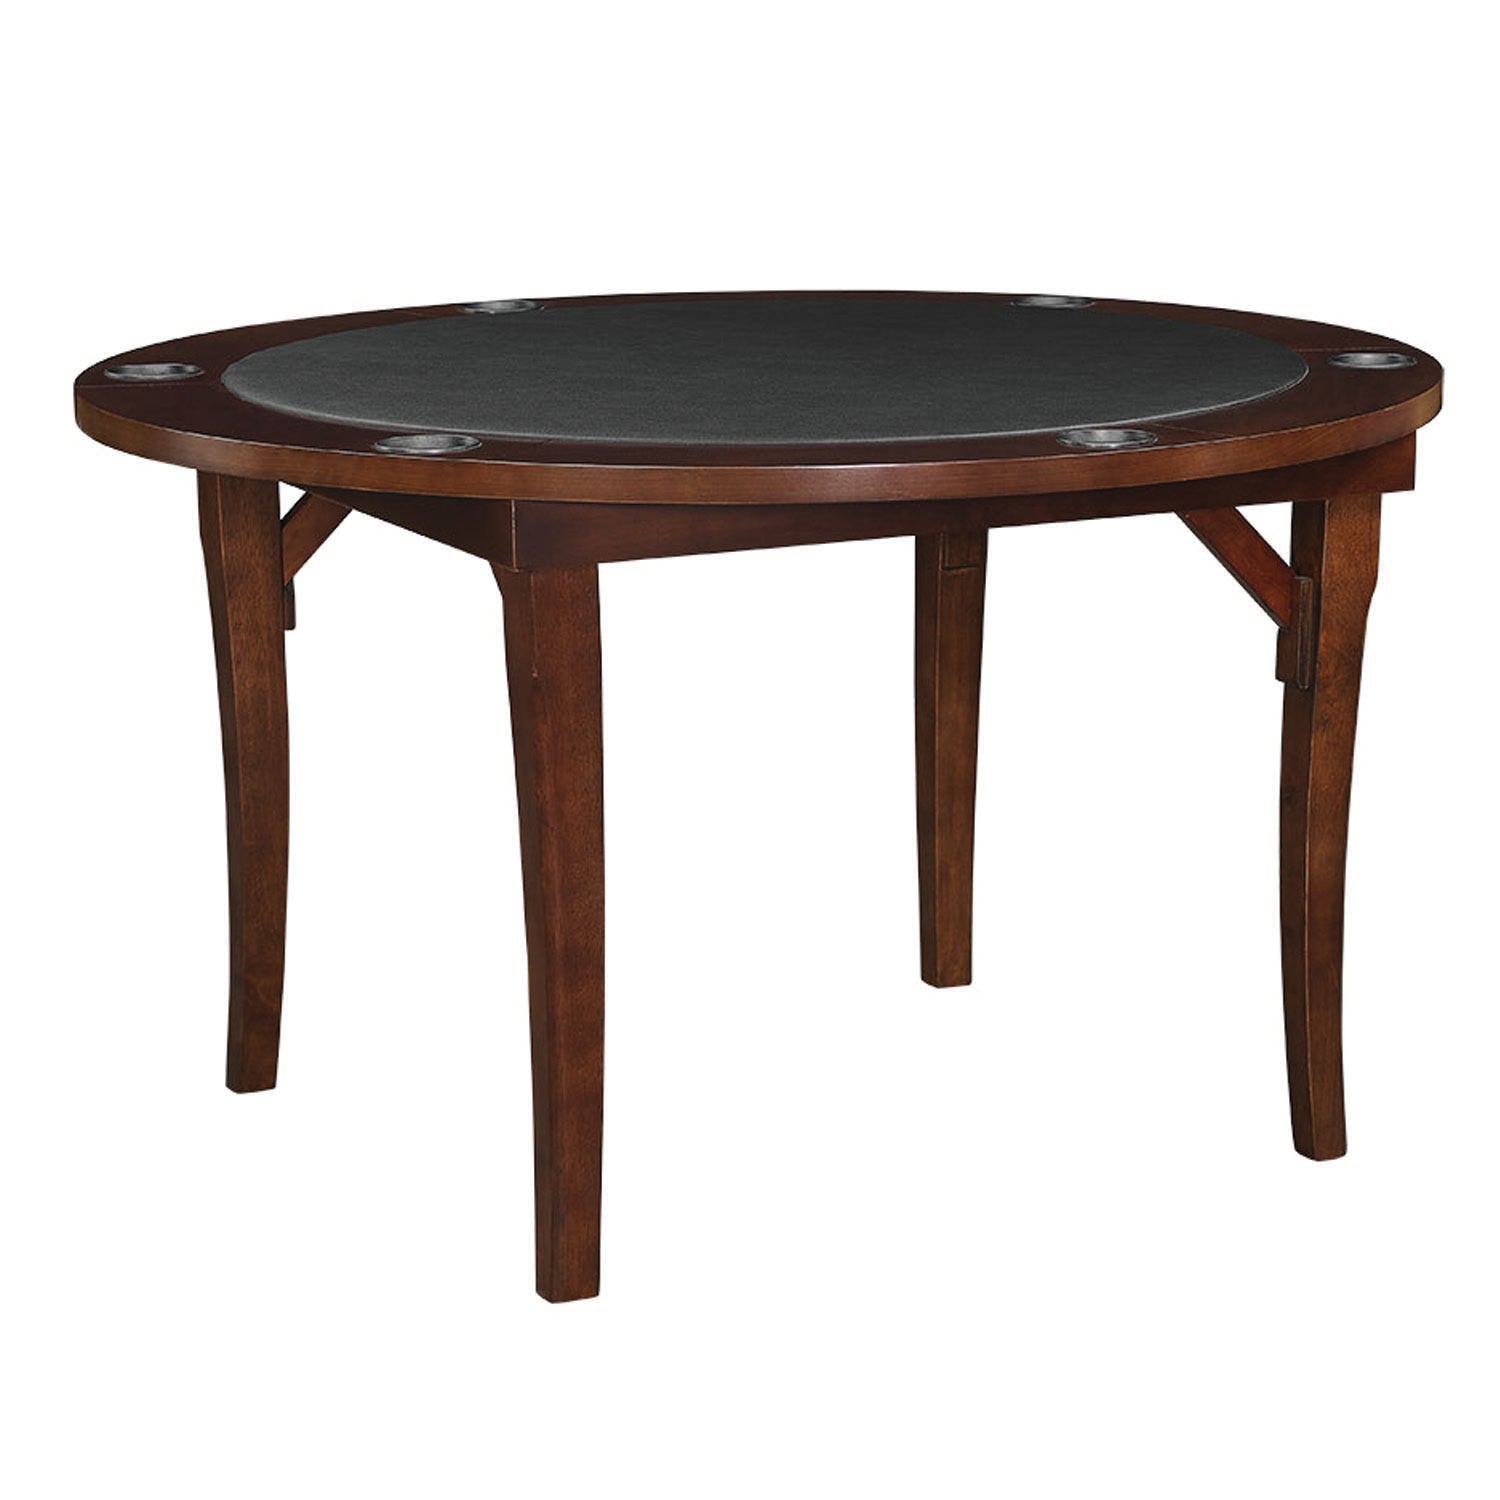 48" FOLDING GAME TABLE - CAPPUCCINO